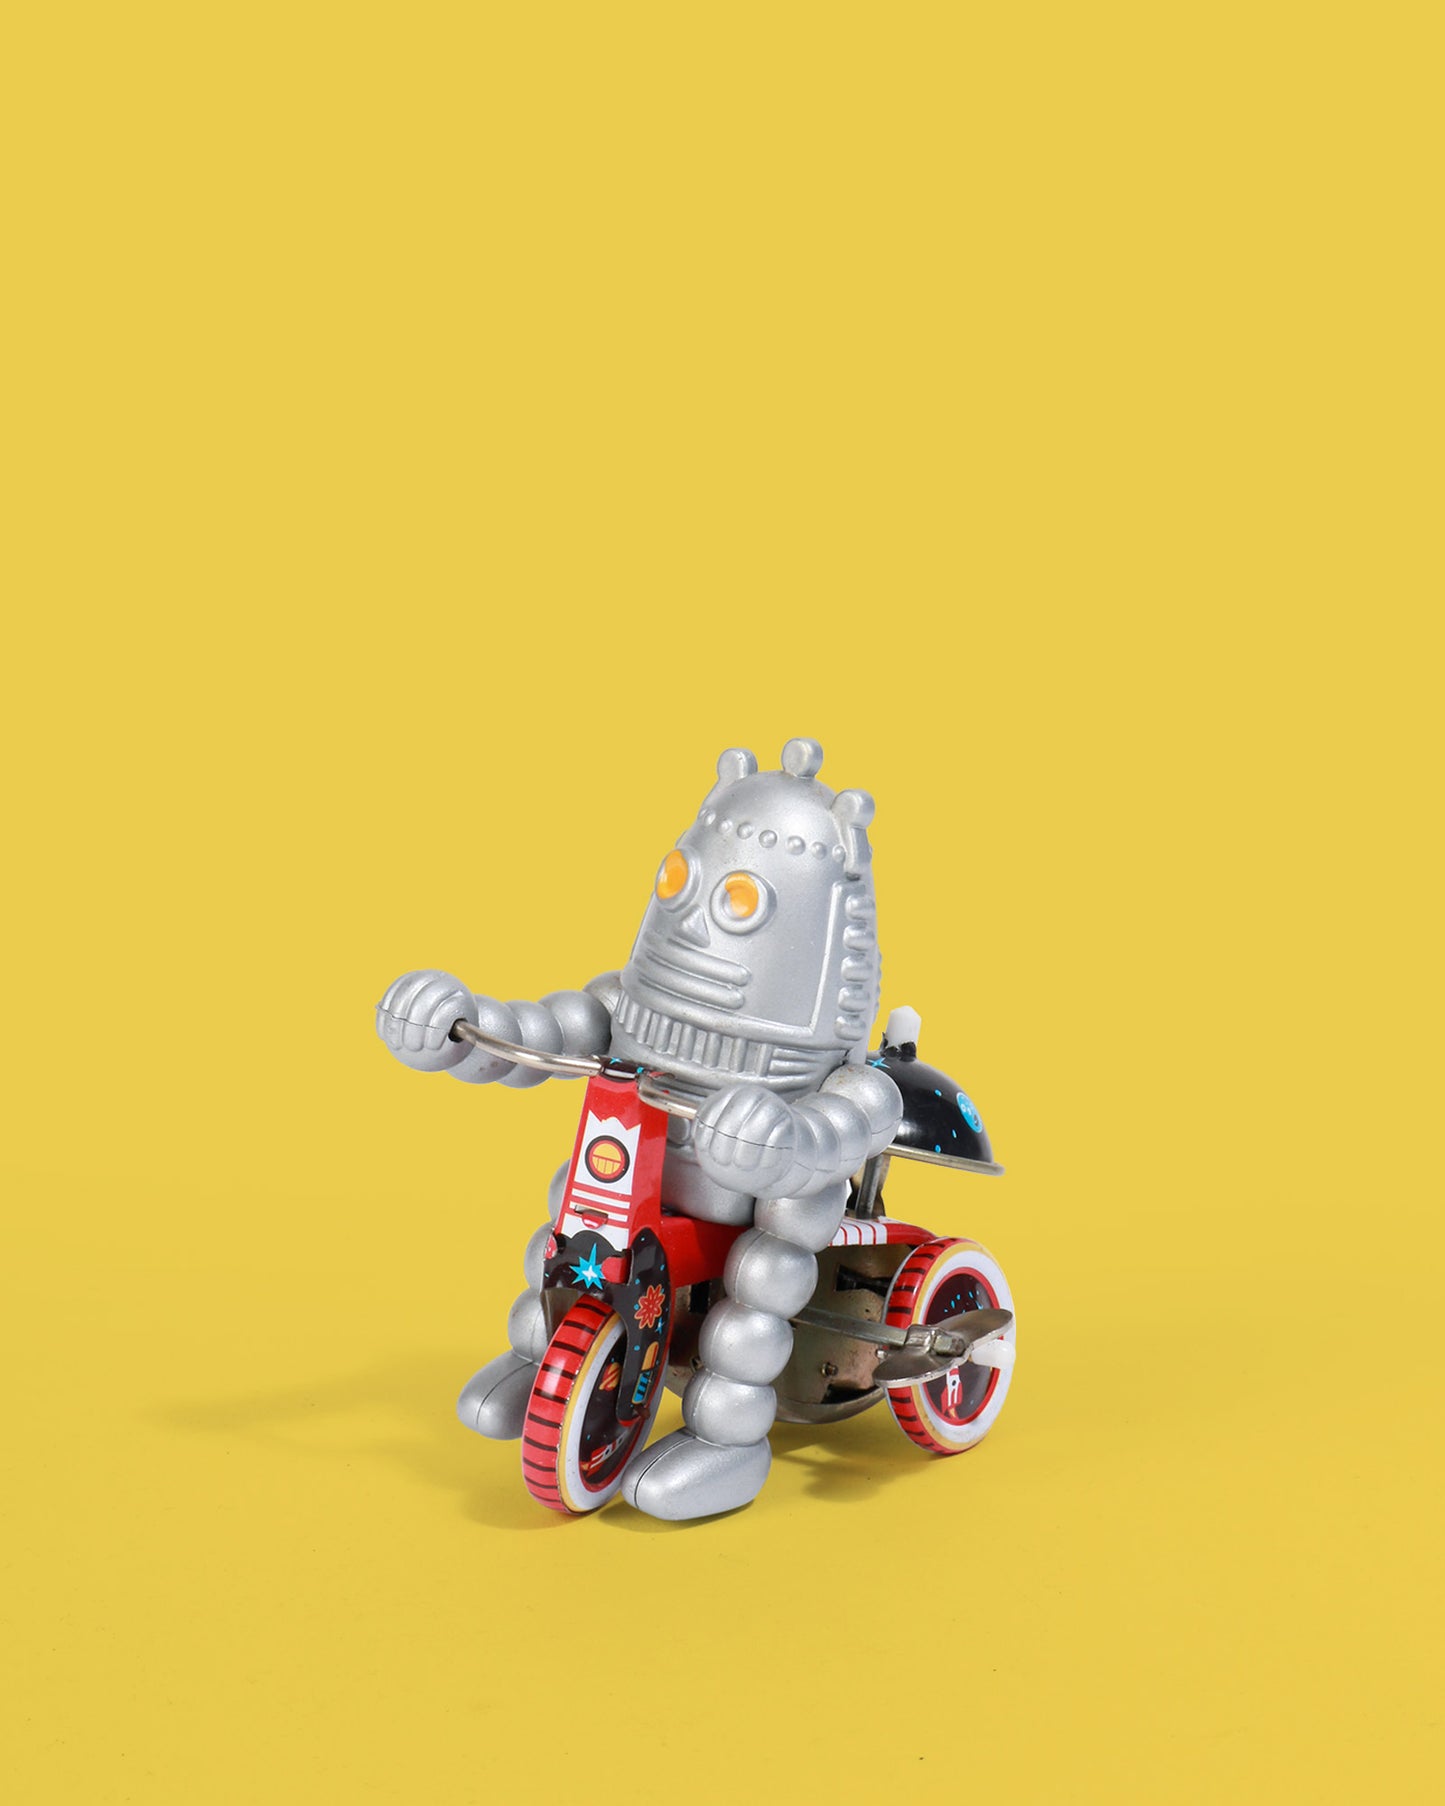 Load image into Gallery viewer, Baby Robot
